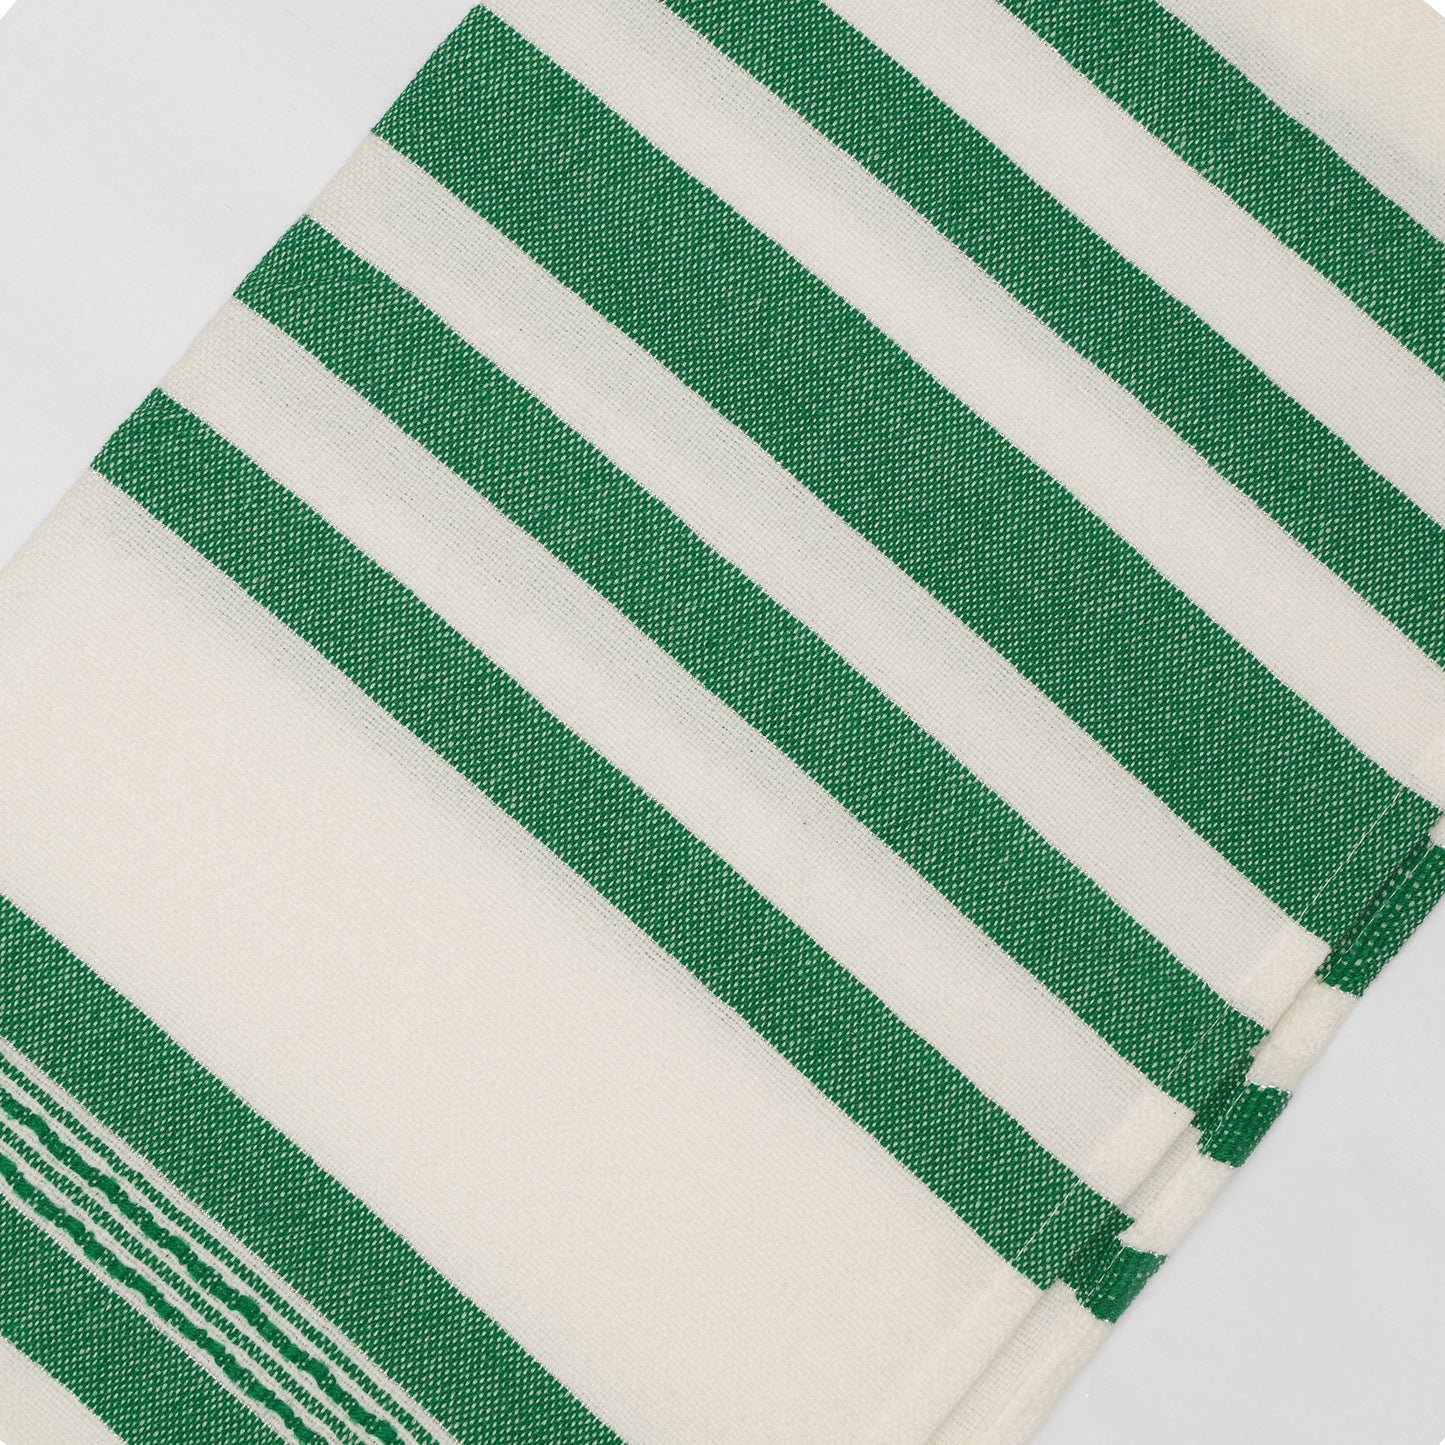 David - Wool Tallit - Wide Green stripes with Silver